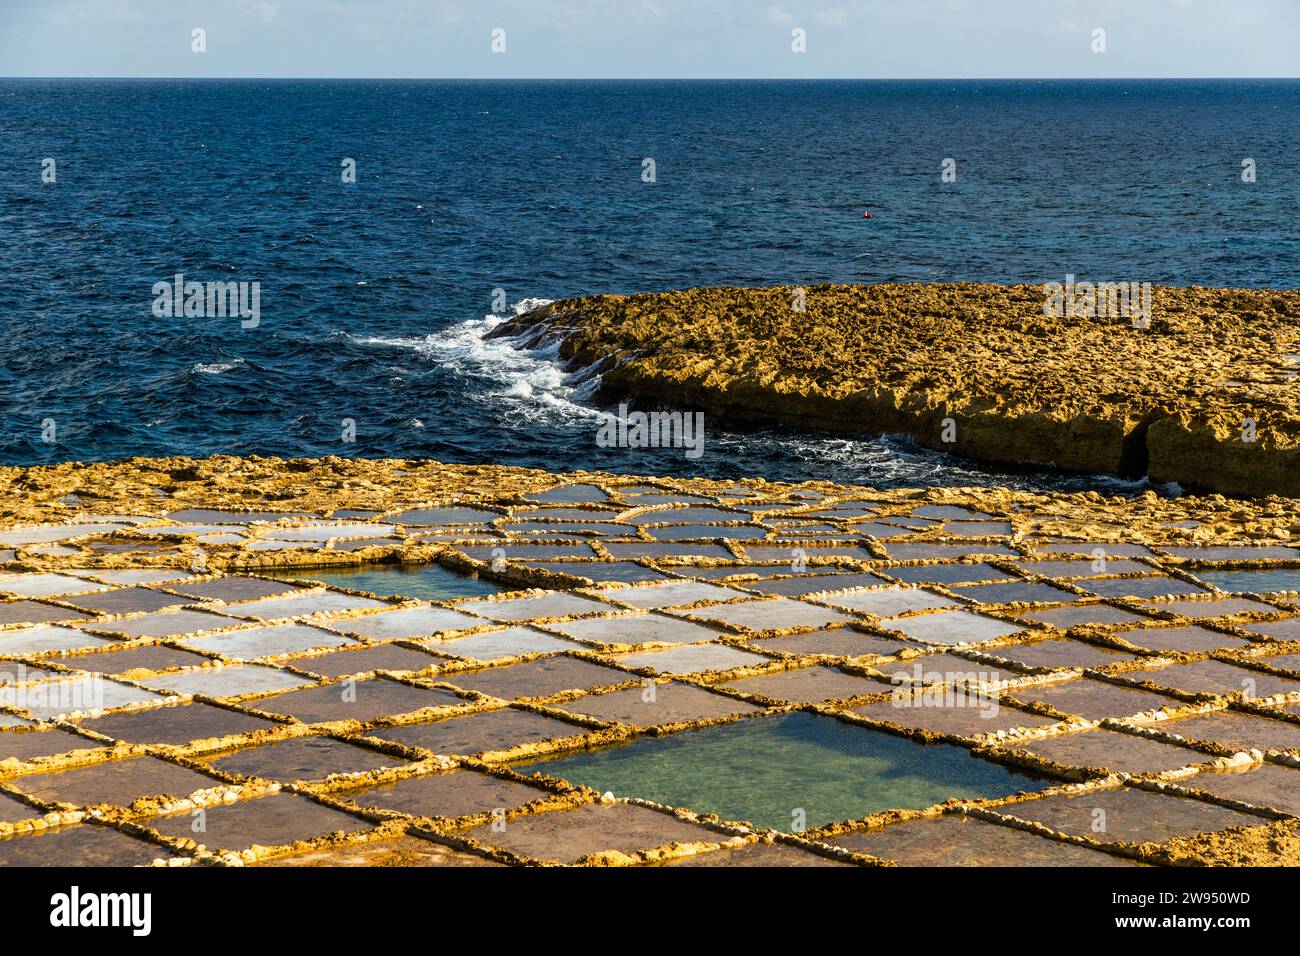 Bay of Xwejni on the north coast of Gozo, where the Cini family has been harvesting salt for five generations. The salt pans stretch along the coast, where seawater, wind and sun make the bay an ideal place for extracting salt from the Mediterranean Sea. Leli Tal-Melh Salt Shop in Xwejni near Marsalforn, Gozo, Malta Stock Photo